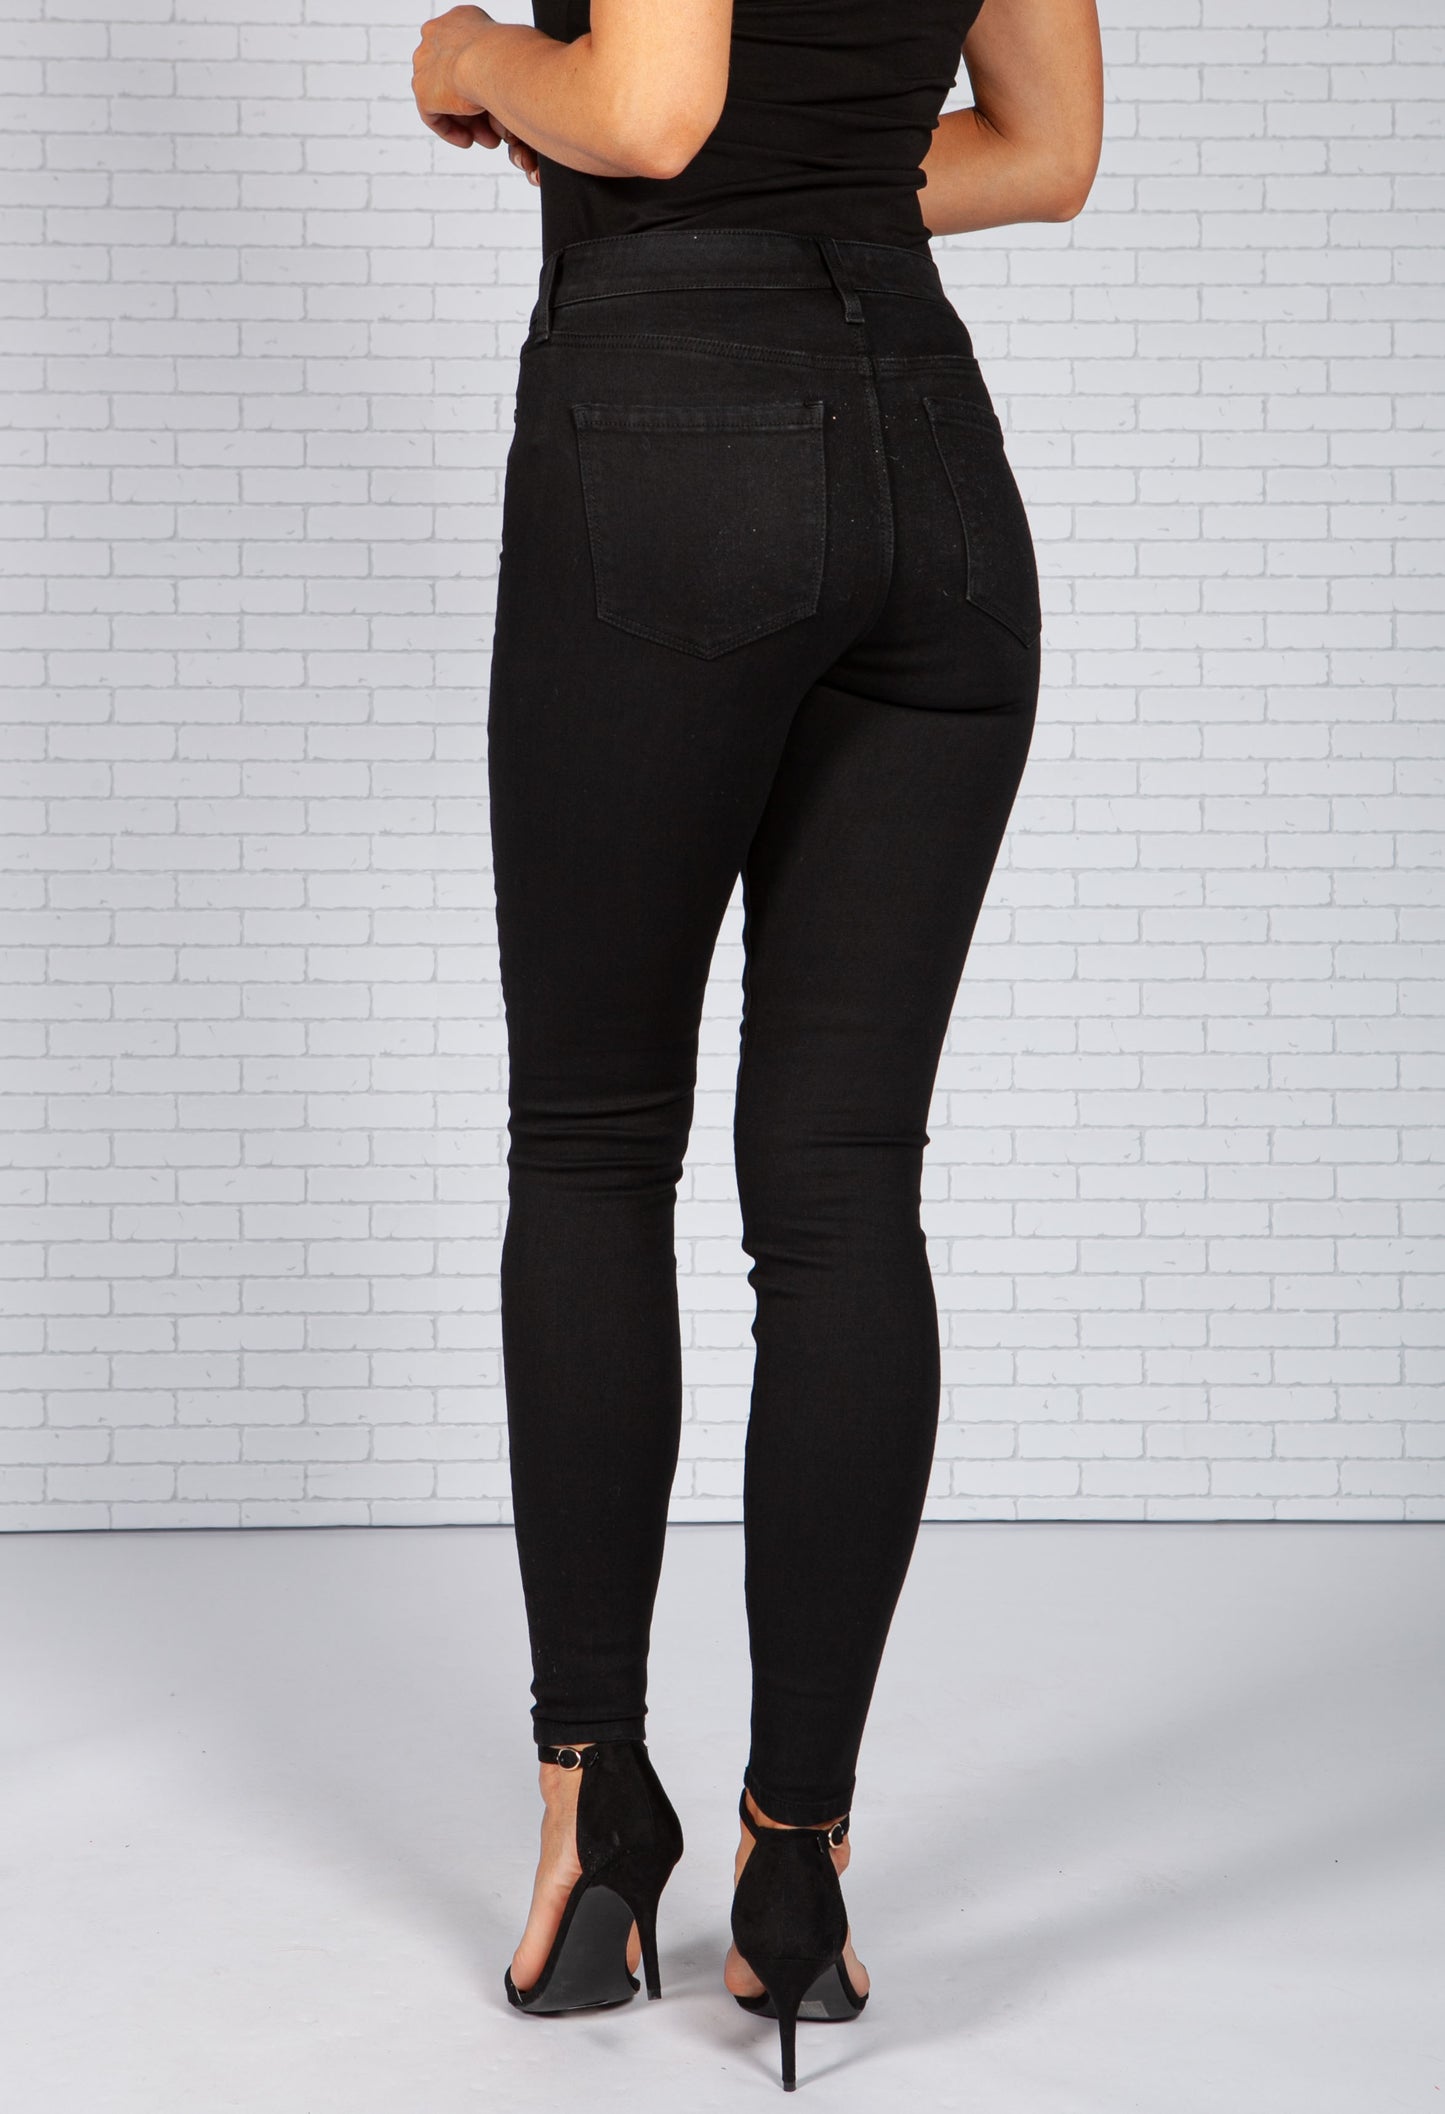 Black Skinny Leg Jeans *Recommend 1 Size Down*